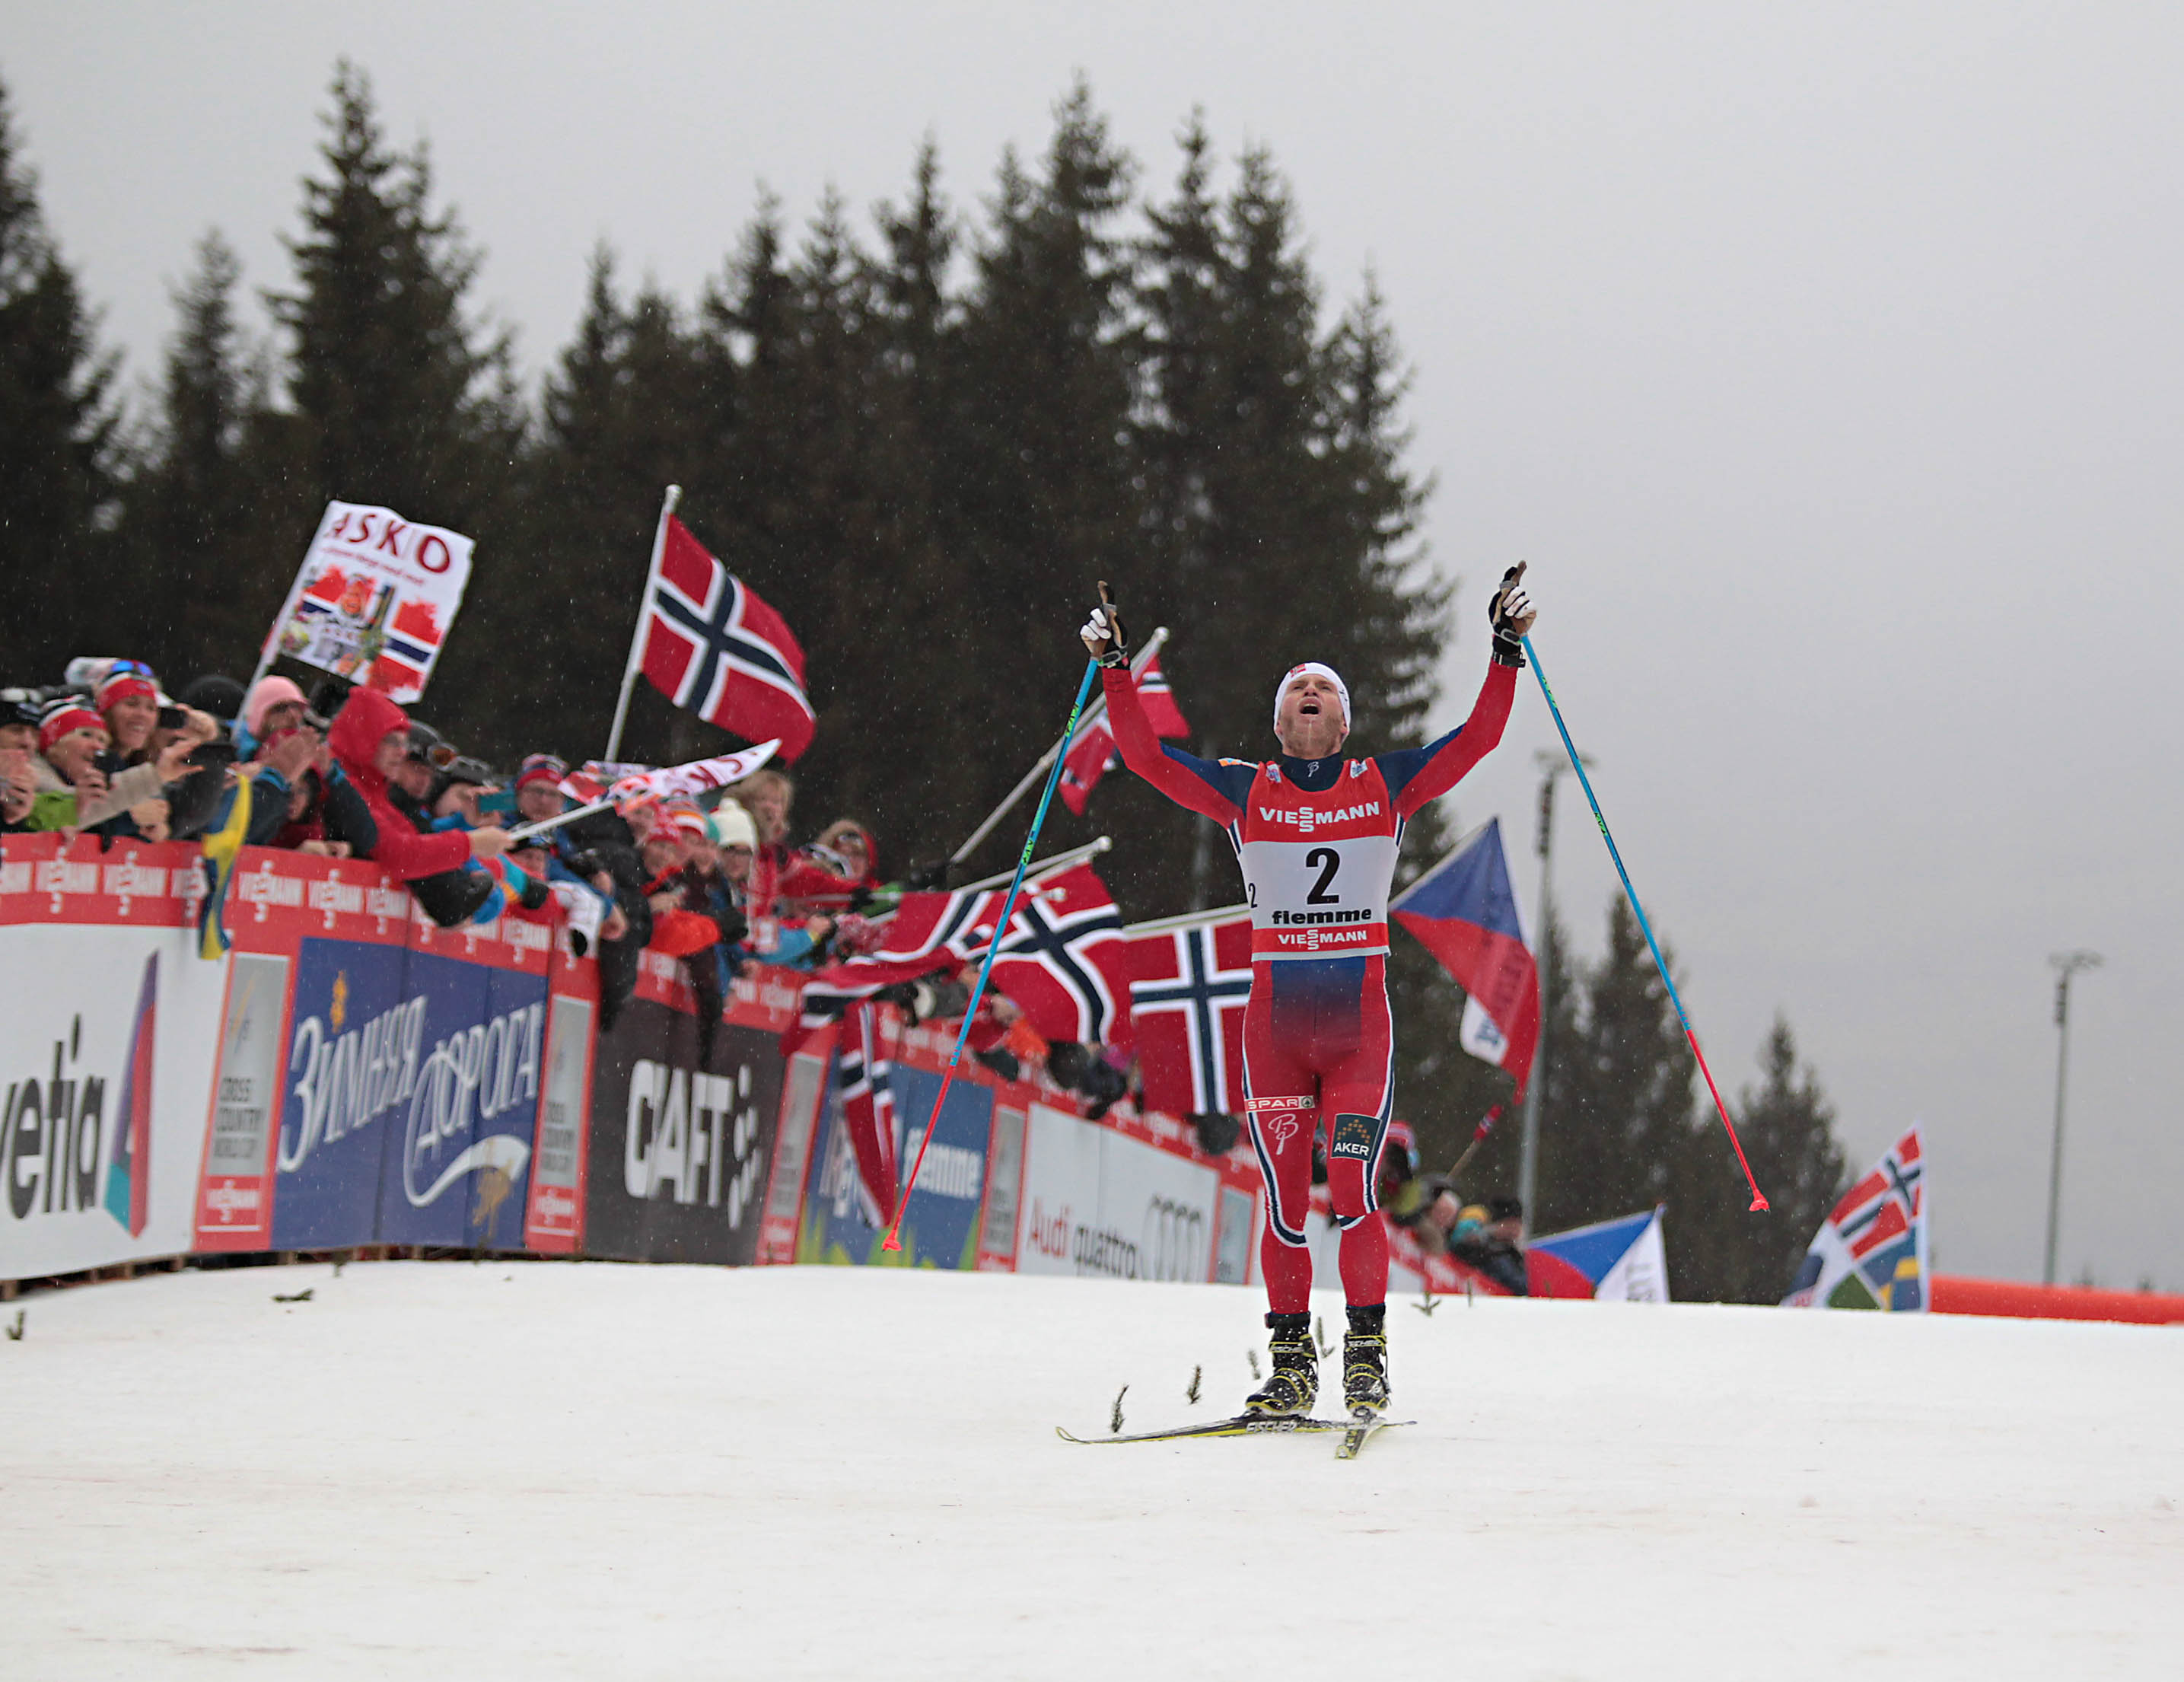 An elated Martin Johnsrud Sundby of Norway crosses the finish line at the top of Alpe Cermis to wrap up his second consecutive Tour de Ski title in Val di Fiemme, Italy, in 2015. A skier who trains over 1,000 hours every year, later in the season Sundby became ill and missed all but one race of World Championships, where he placed 11th in the 50 k. (Photo: (Photo: Val di Fiemme/www.fiemmeworldcup.com)